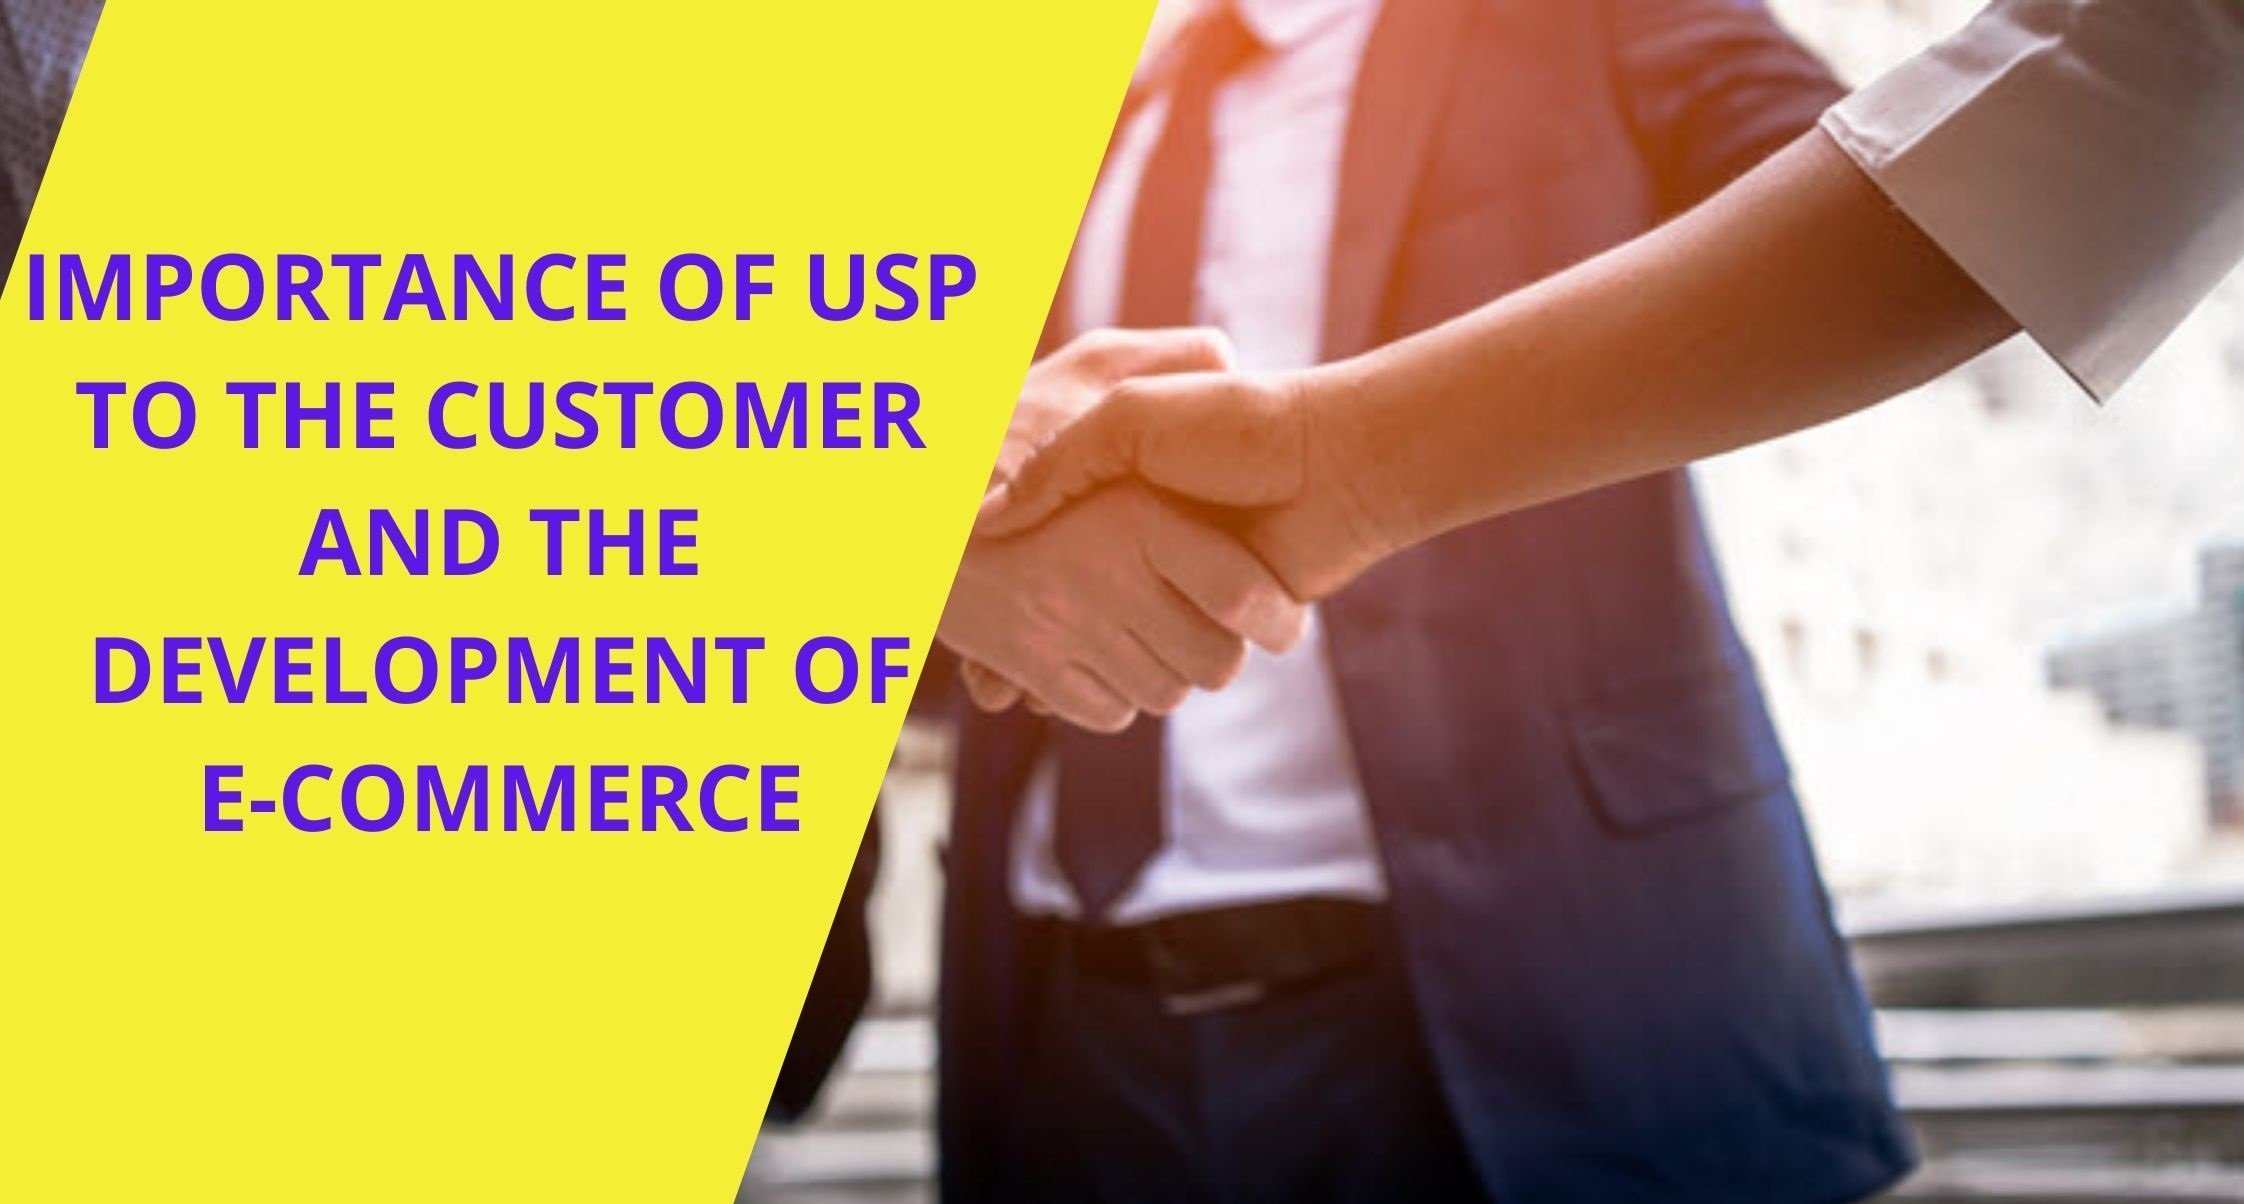 HOW IMPORTANT IS A UNIQUE SELLING POINT TO THE CUSTOMER AND THE DEVELOPMENT OF E-COMMERCE?